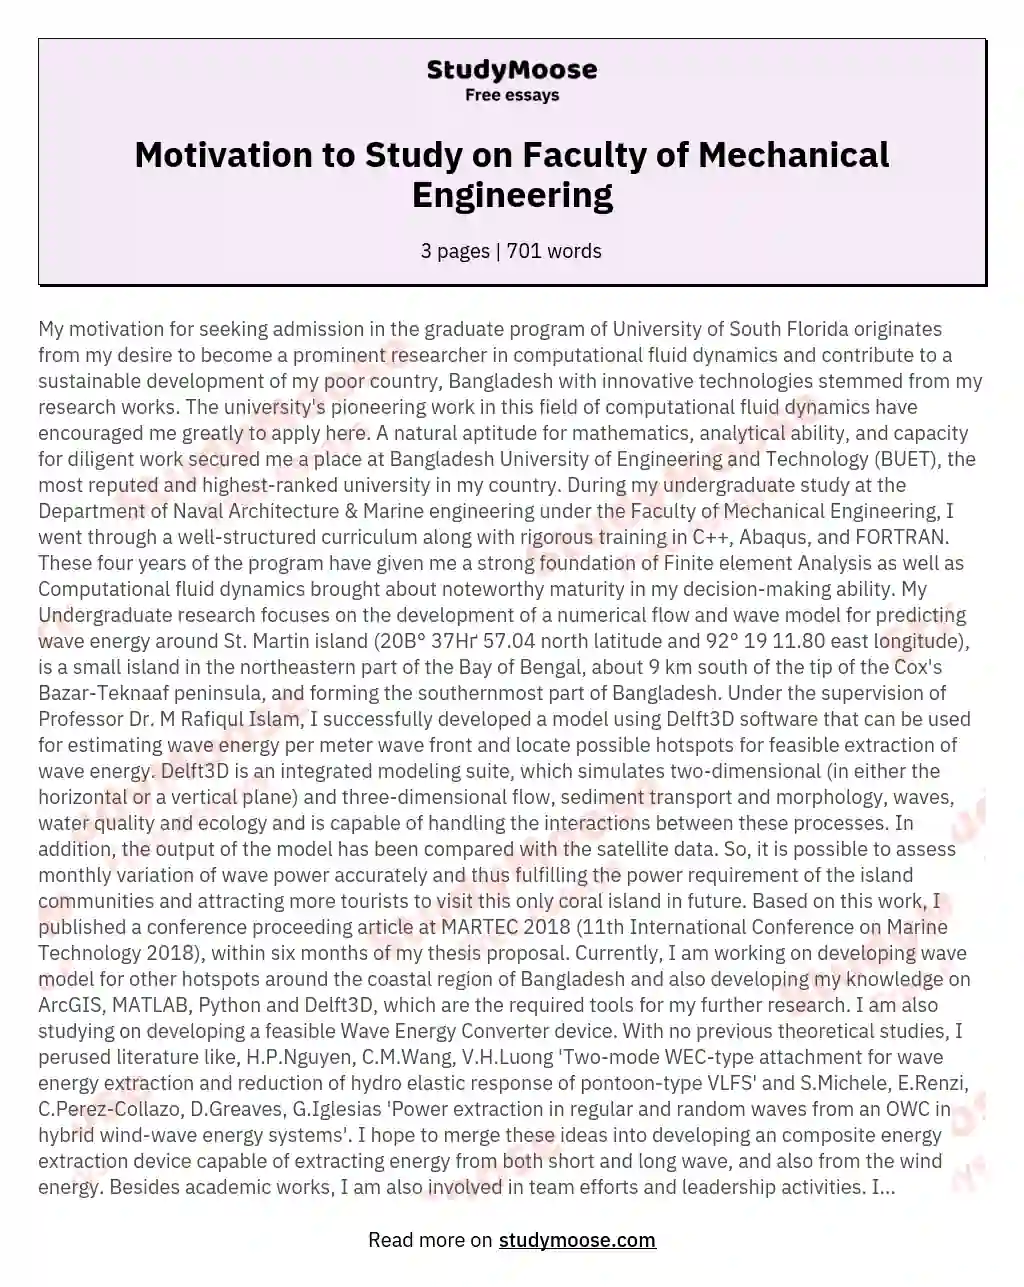 Motivation to Study on Faculty of Mechanical Engineering essay